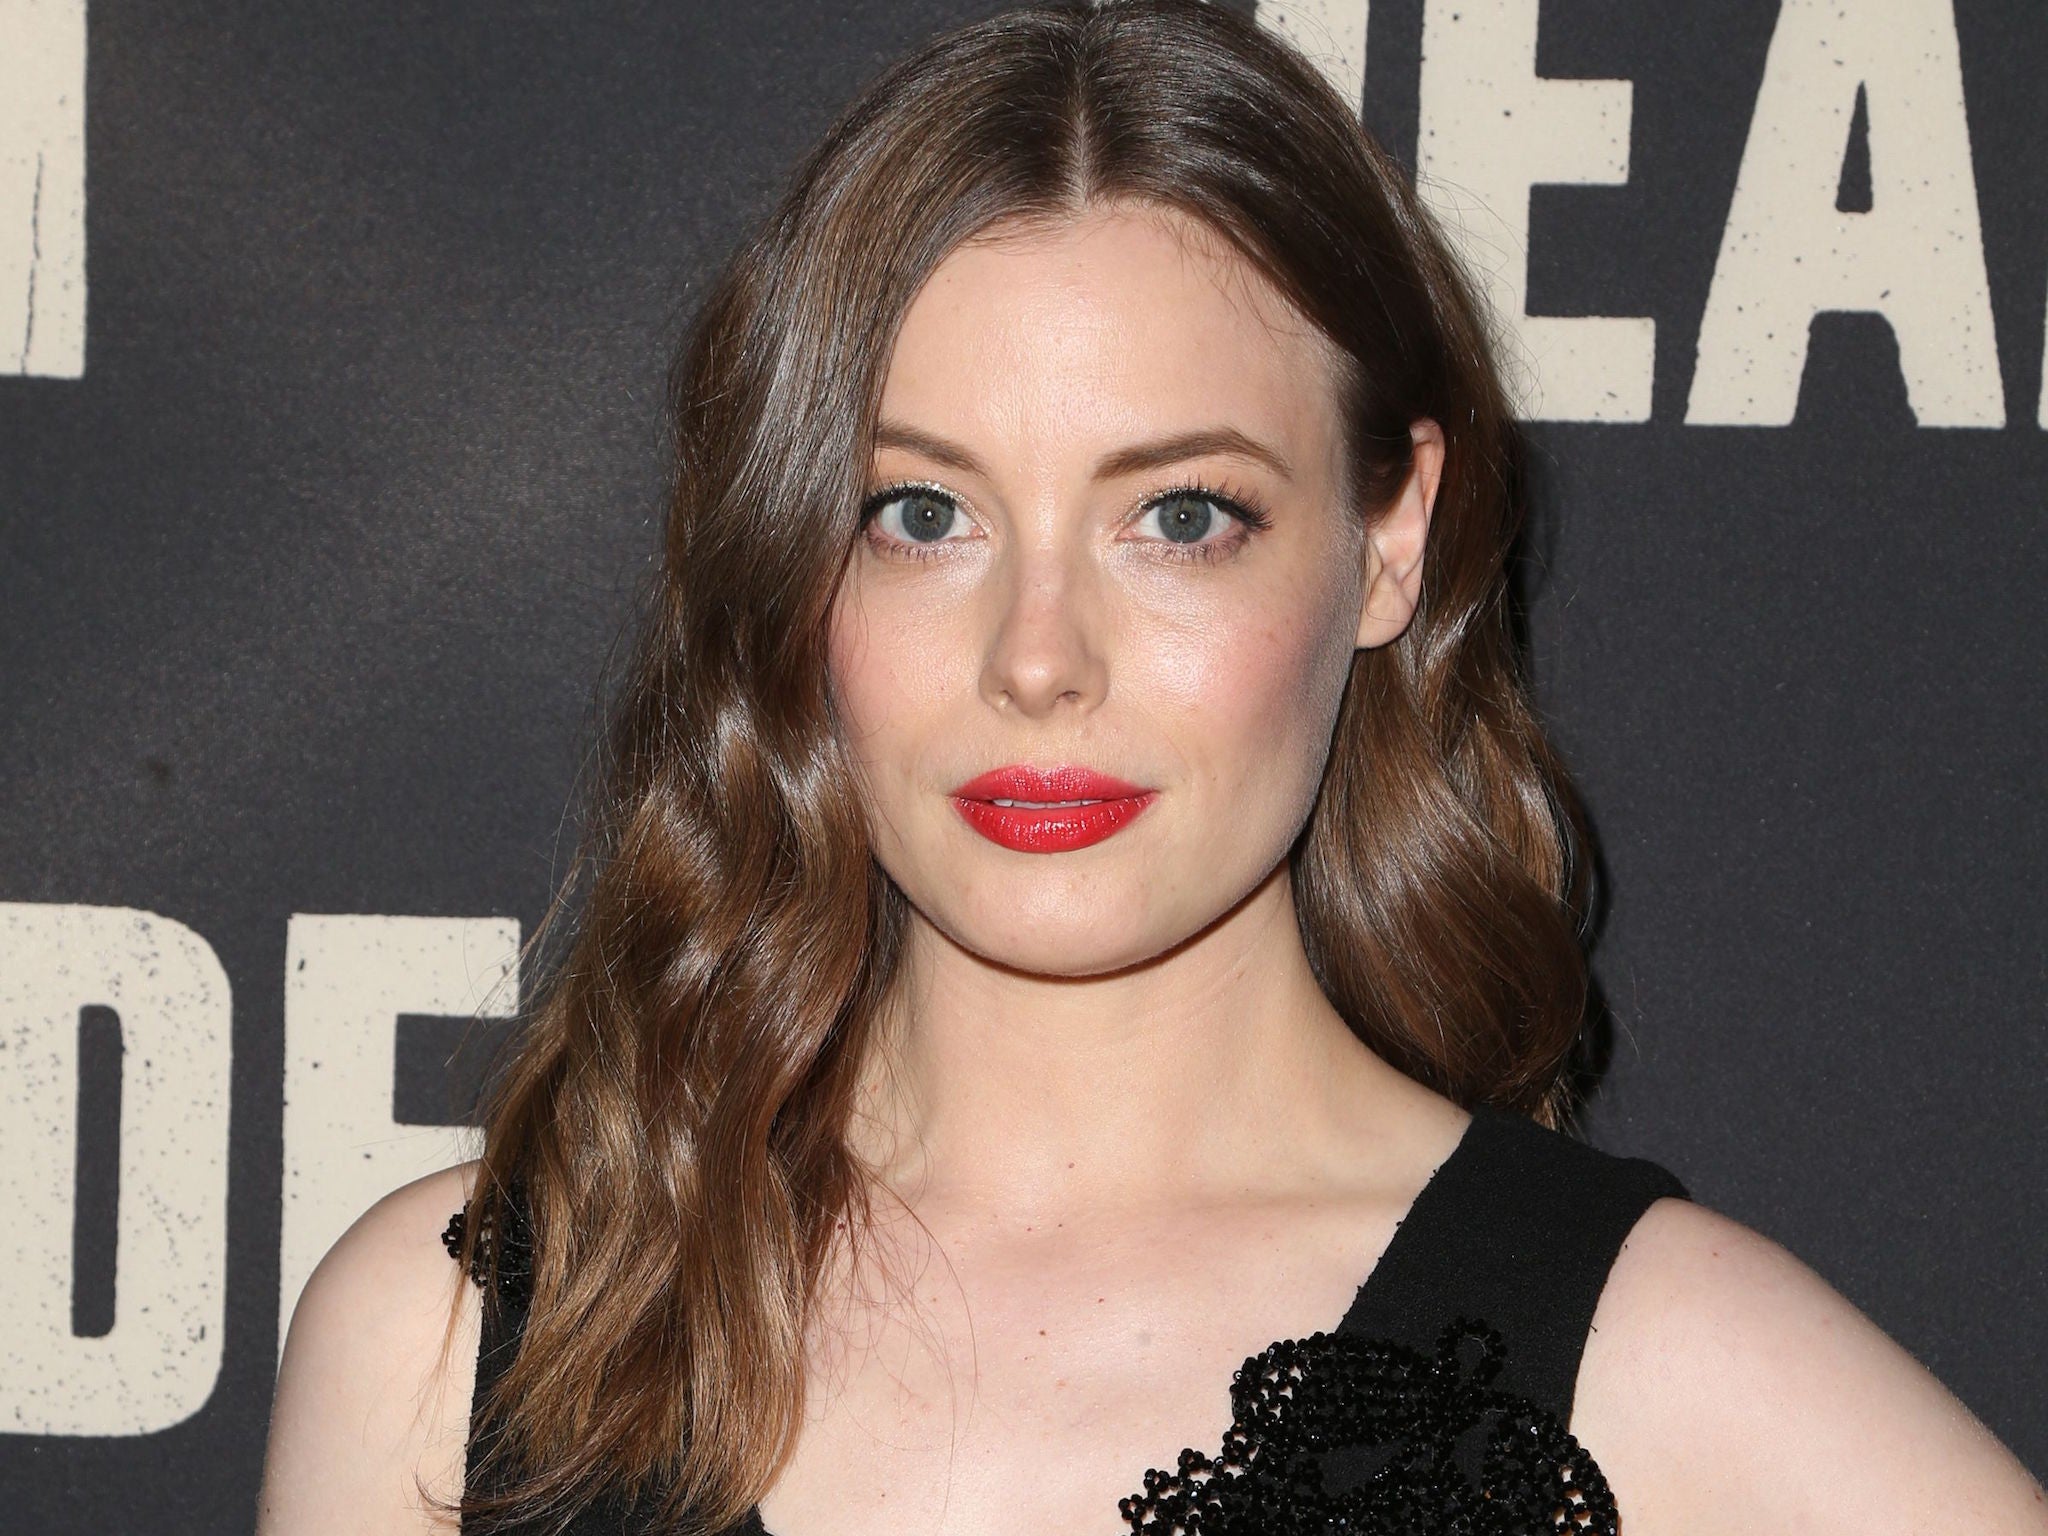 Gillian Jacobs Wiki Bio Age Net Worth And Other Facts FactsFive.